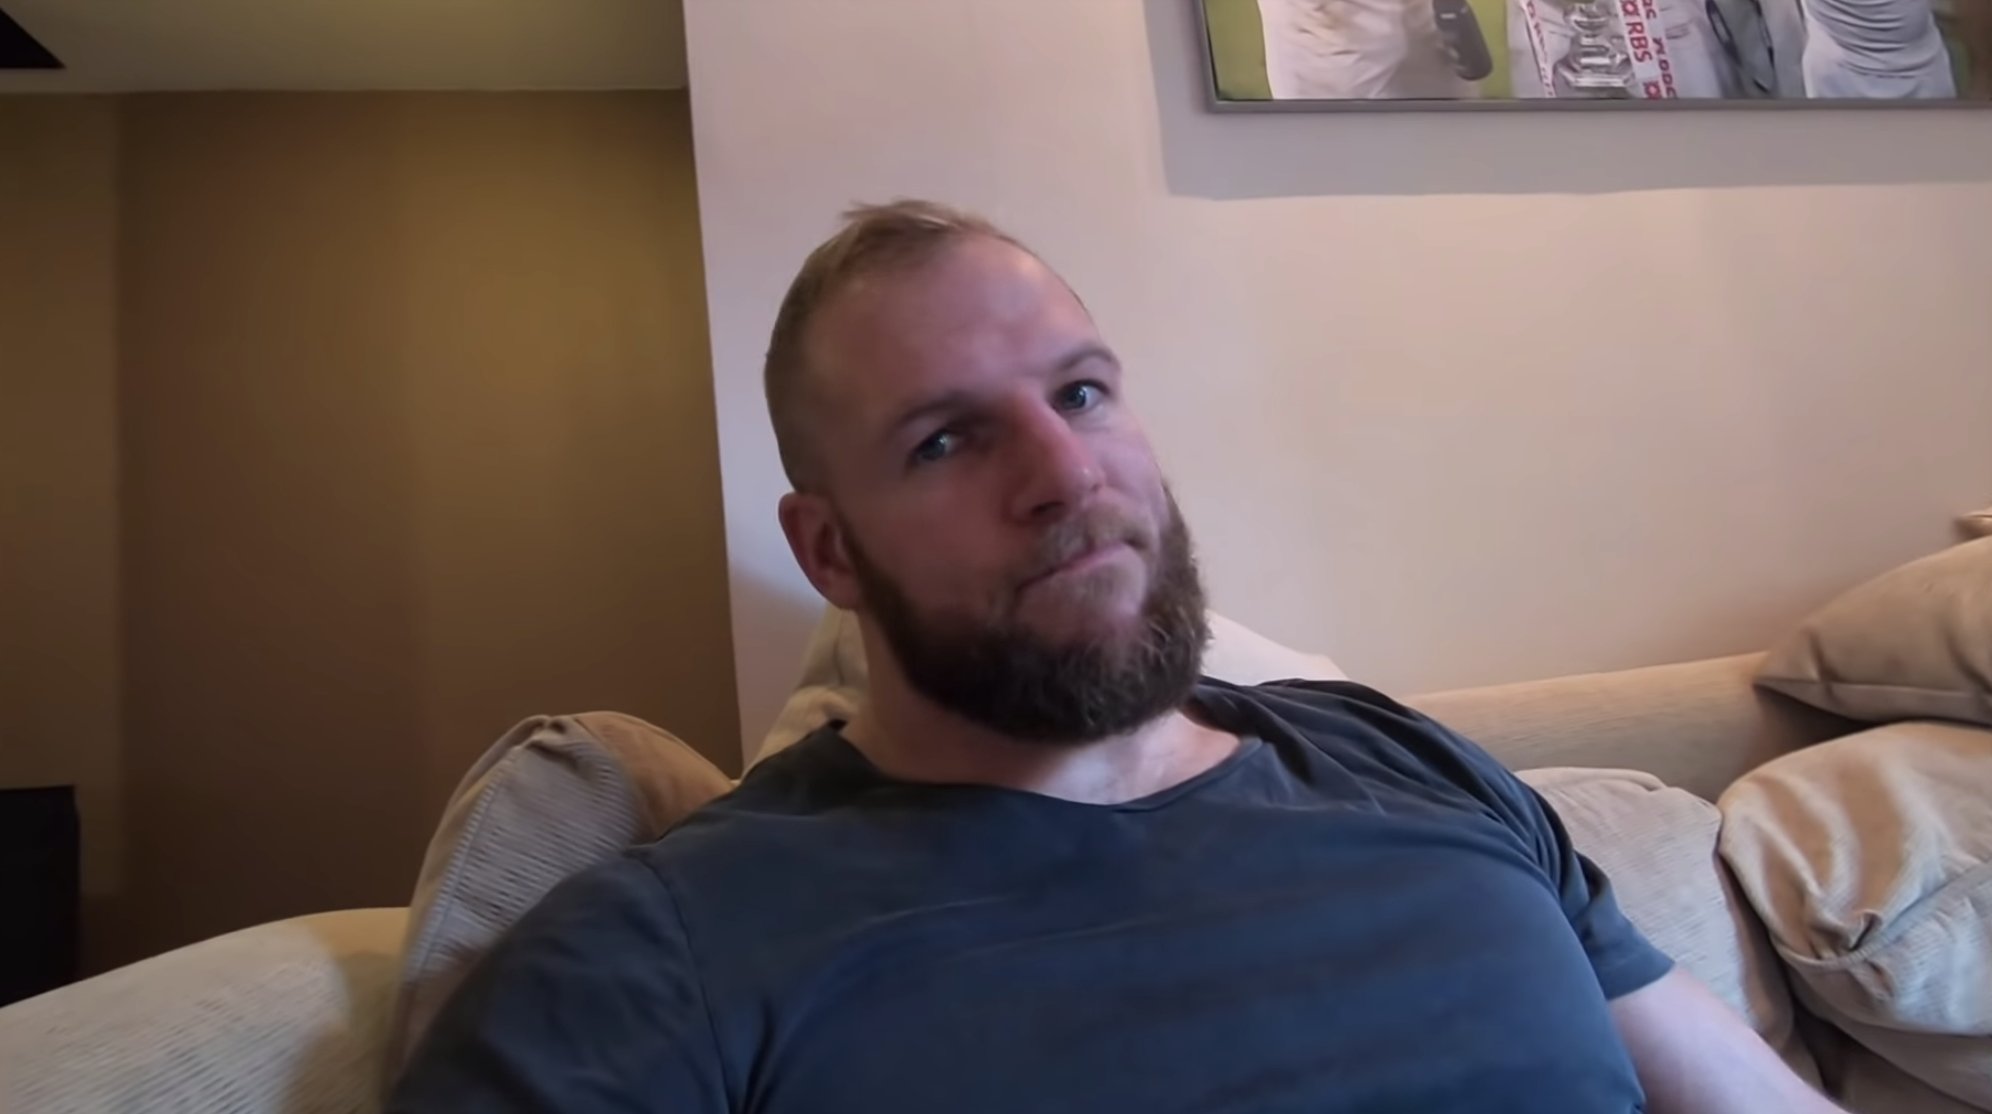 VIDEO: James Haskell's new YouTube VLOG reveals a great deal about daily life as a rugby player